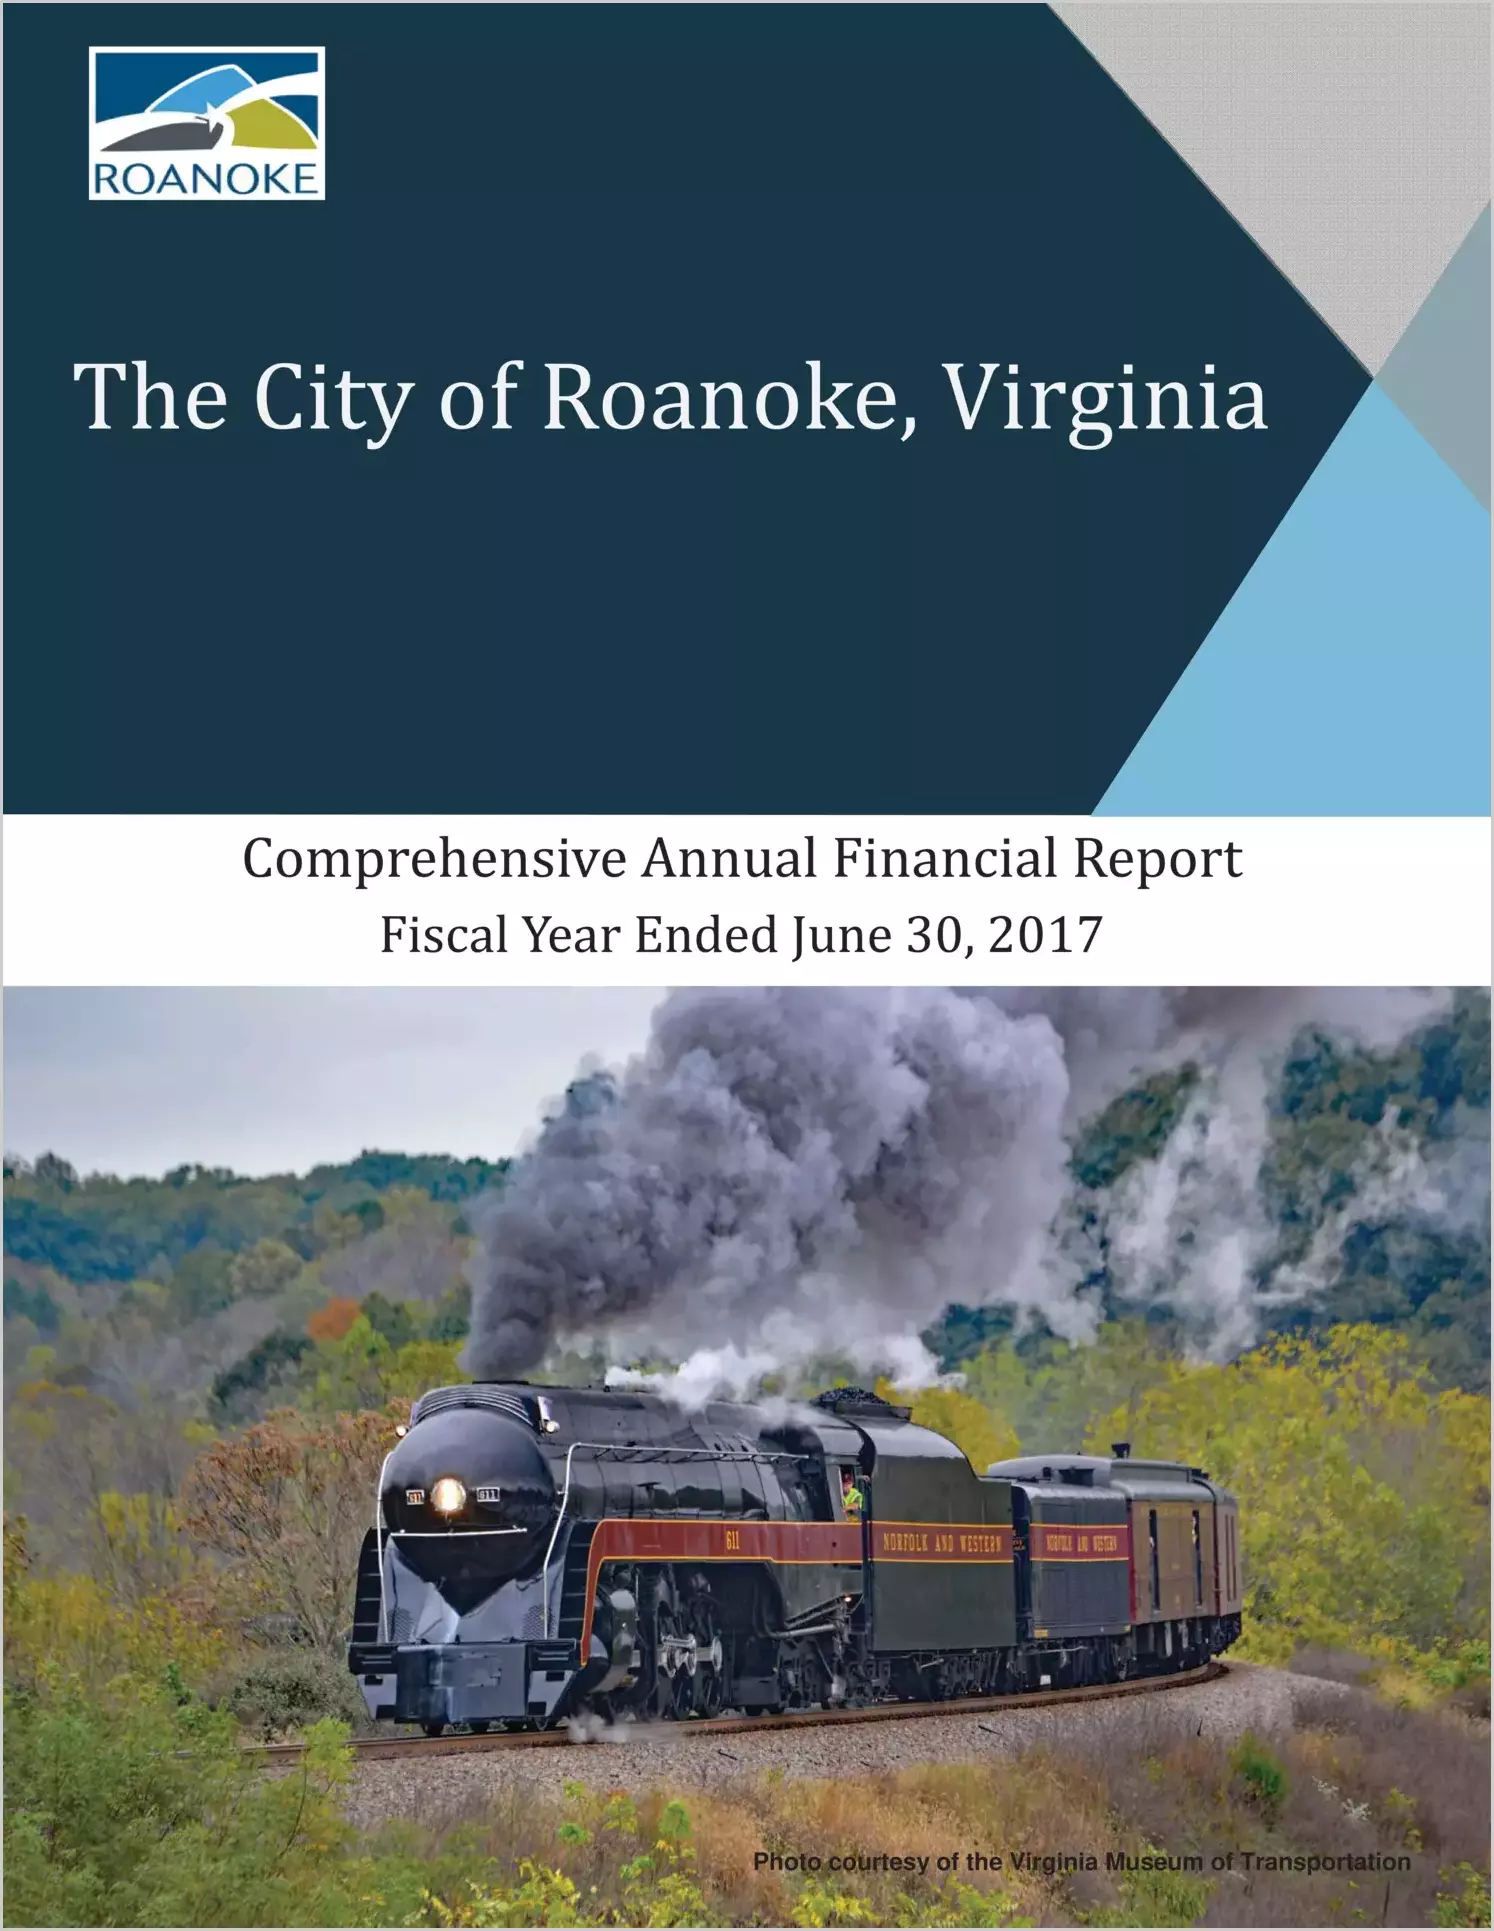 2017 Annual Financial Report for City of Roanoke